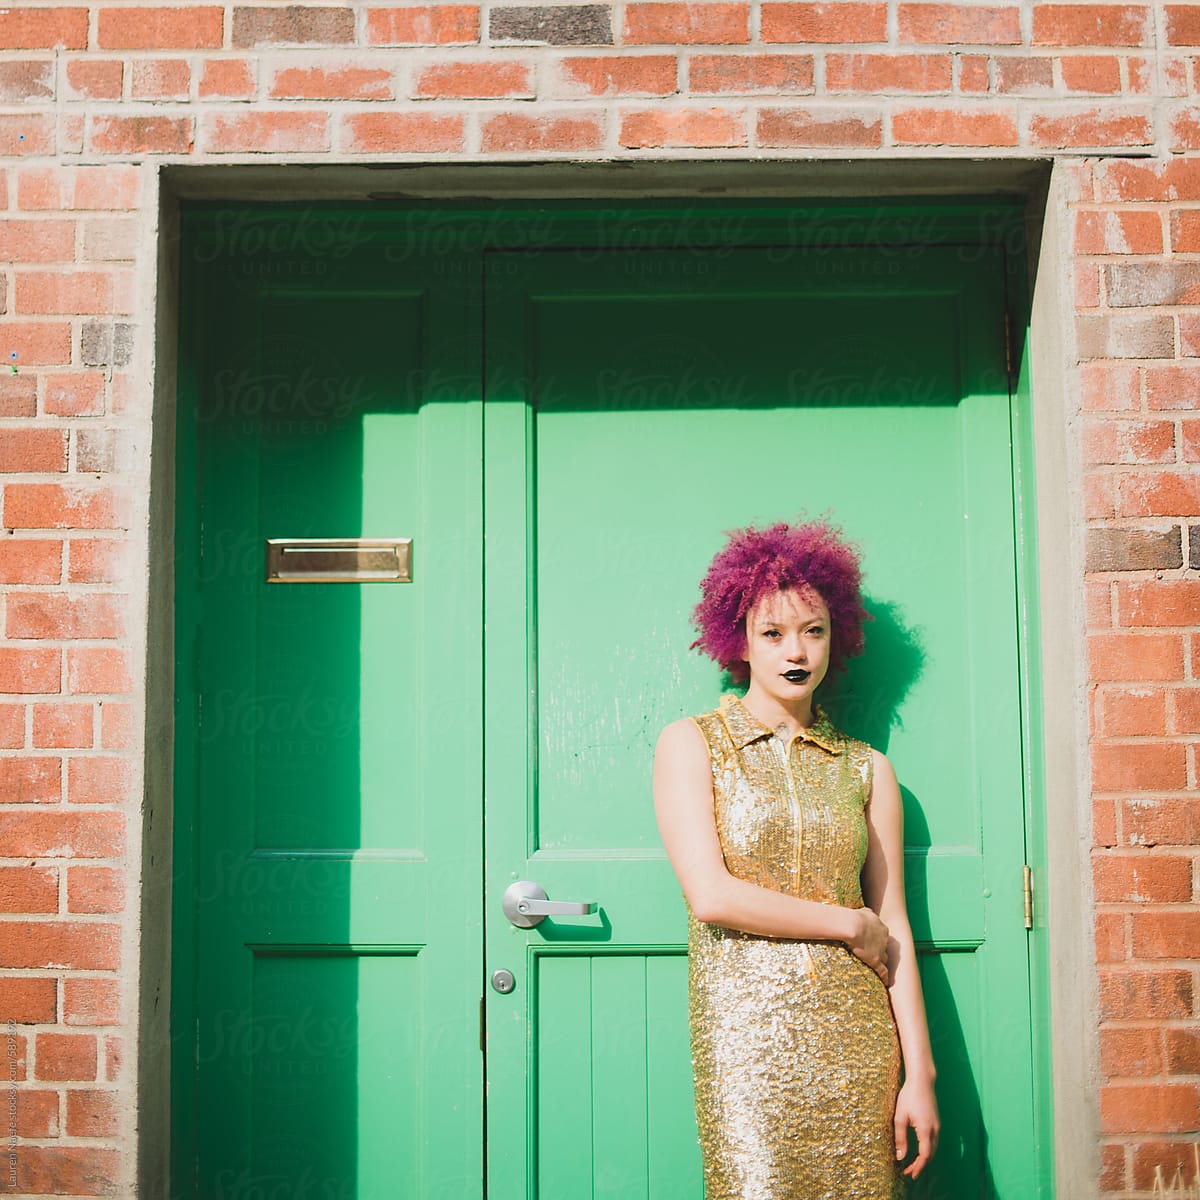 Young woman dressed up, standing against green door